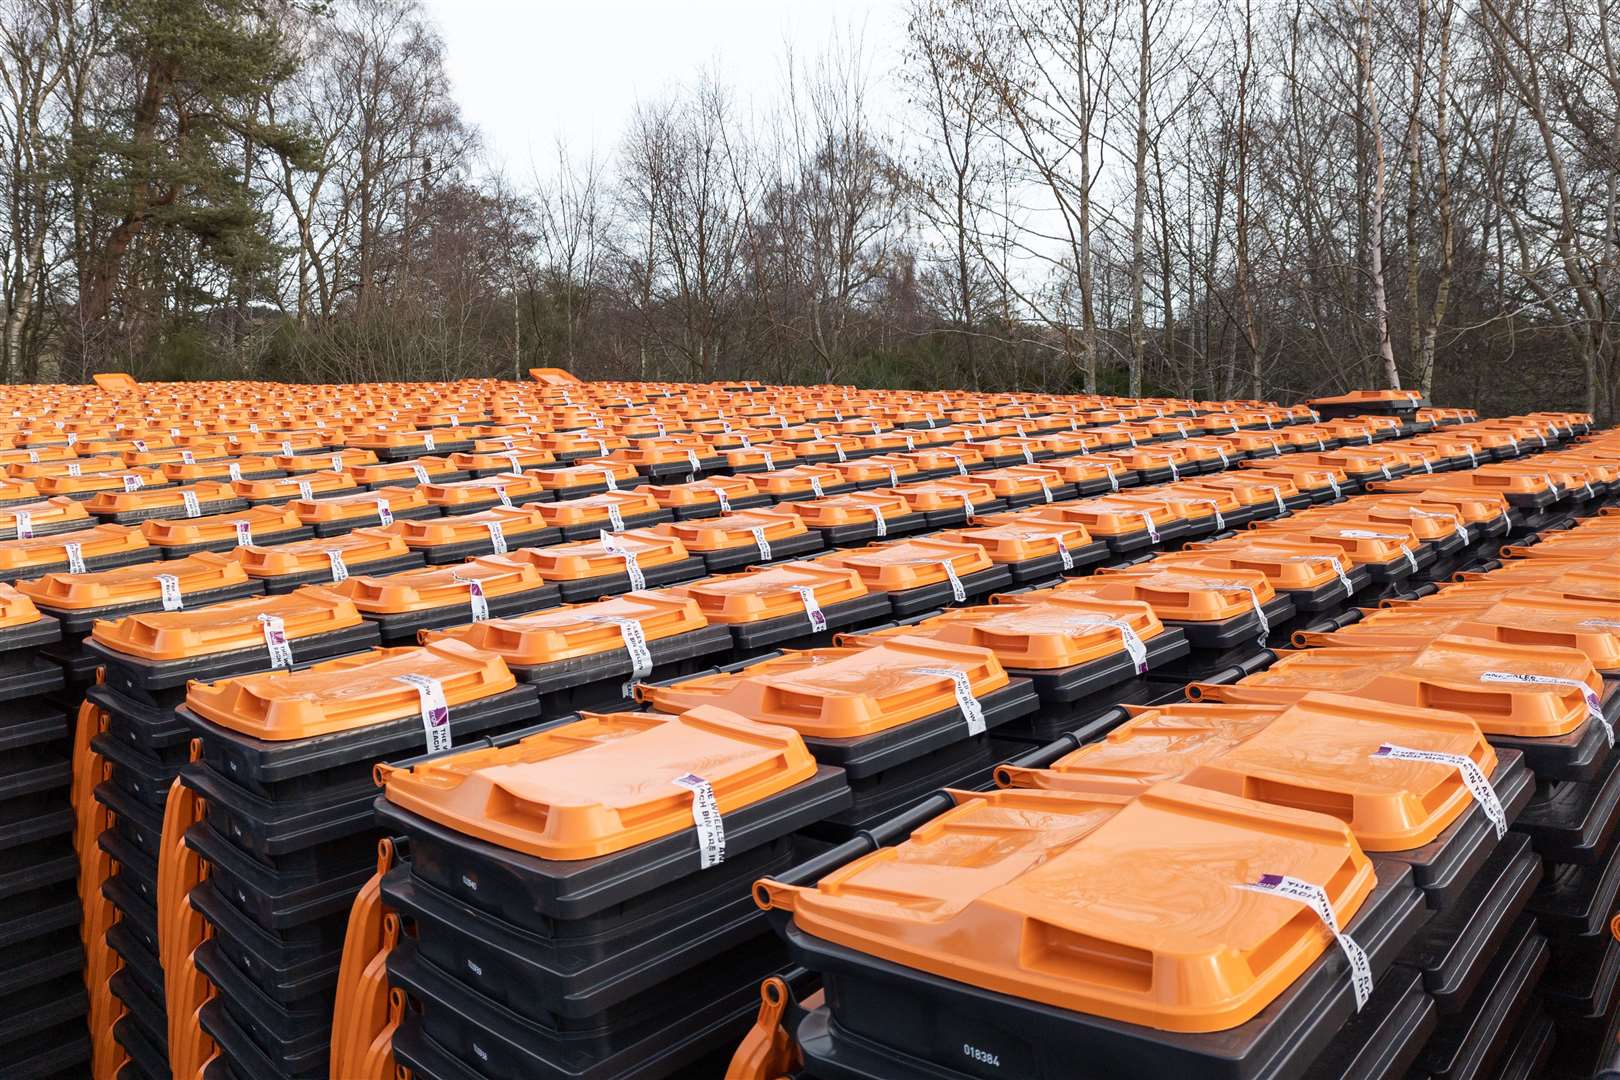 The new orange-lidded bins have been rolled out across Aberdeenshire.